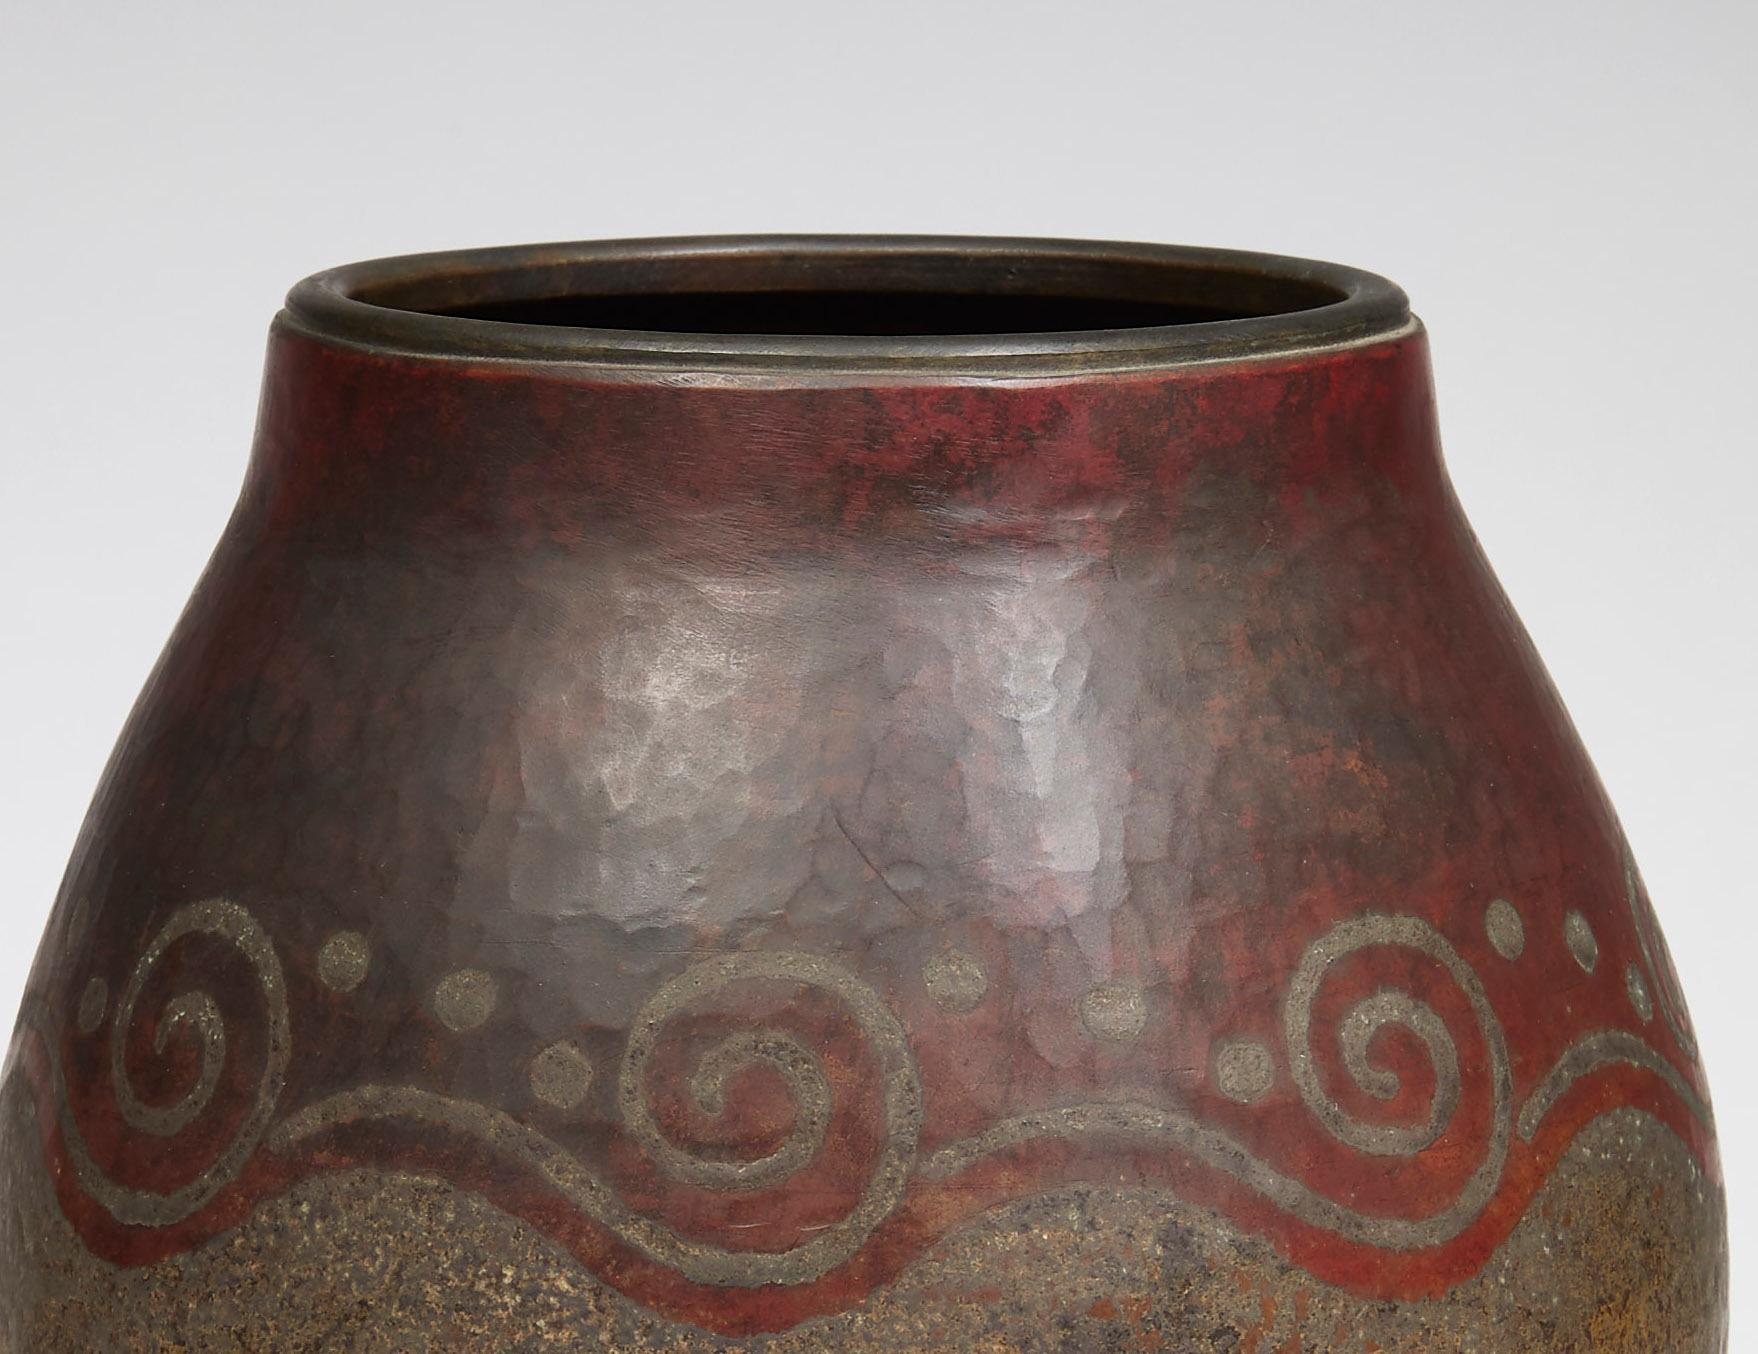 Curved with wide neck vase in copperware with a moiré patina, decorated with ripples and dotted dots made with a fire patina. Signed and numbered 7295 under the base.